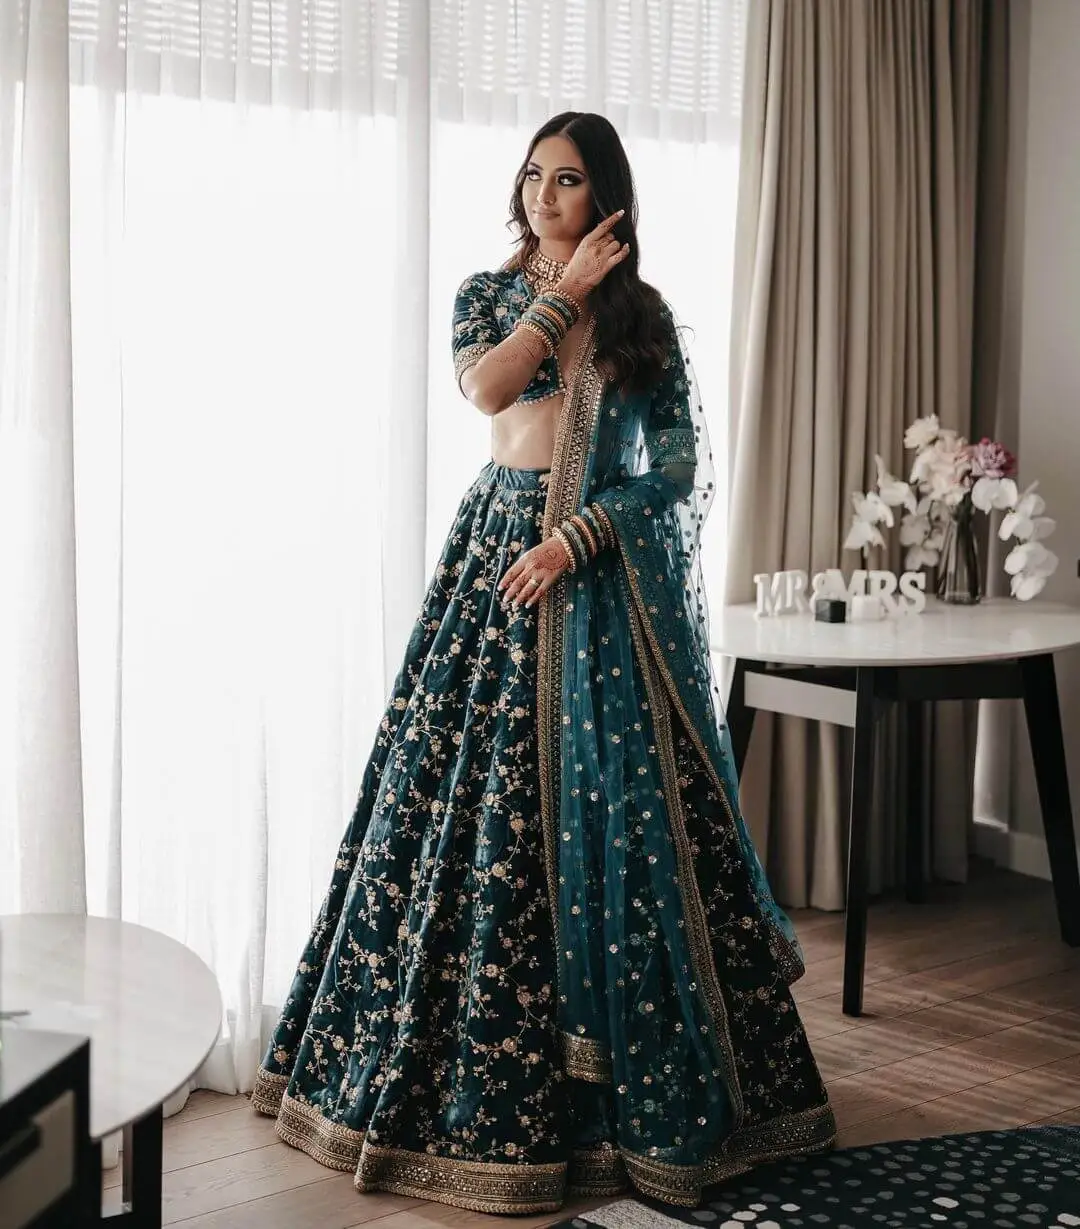 Shop Embroidered Emerald Green Lehenga Online @ Best Price